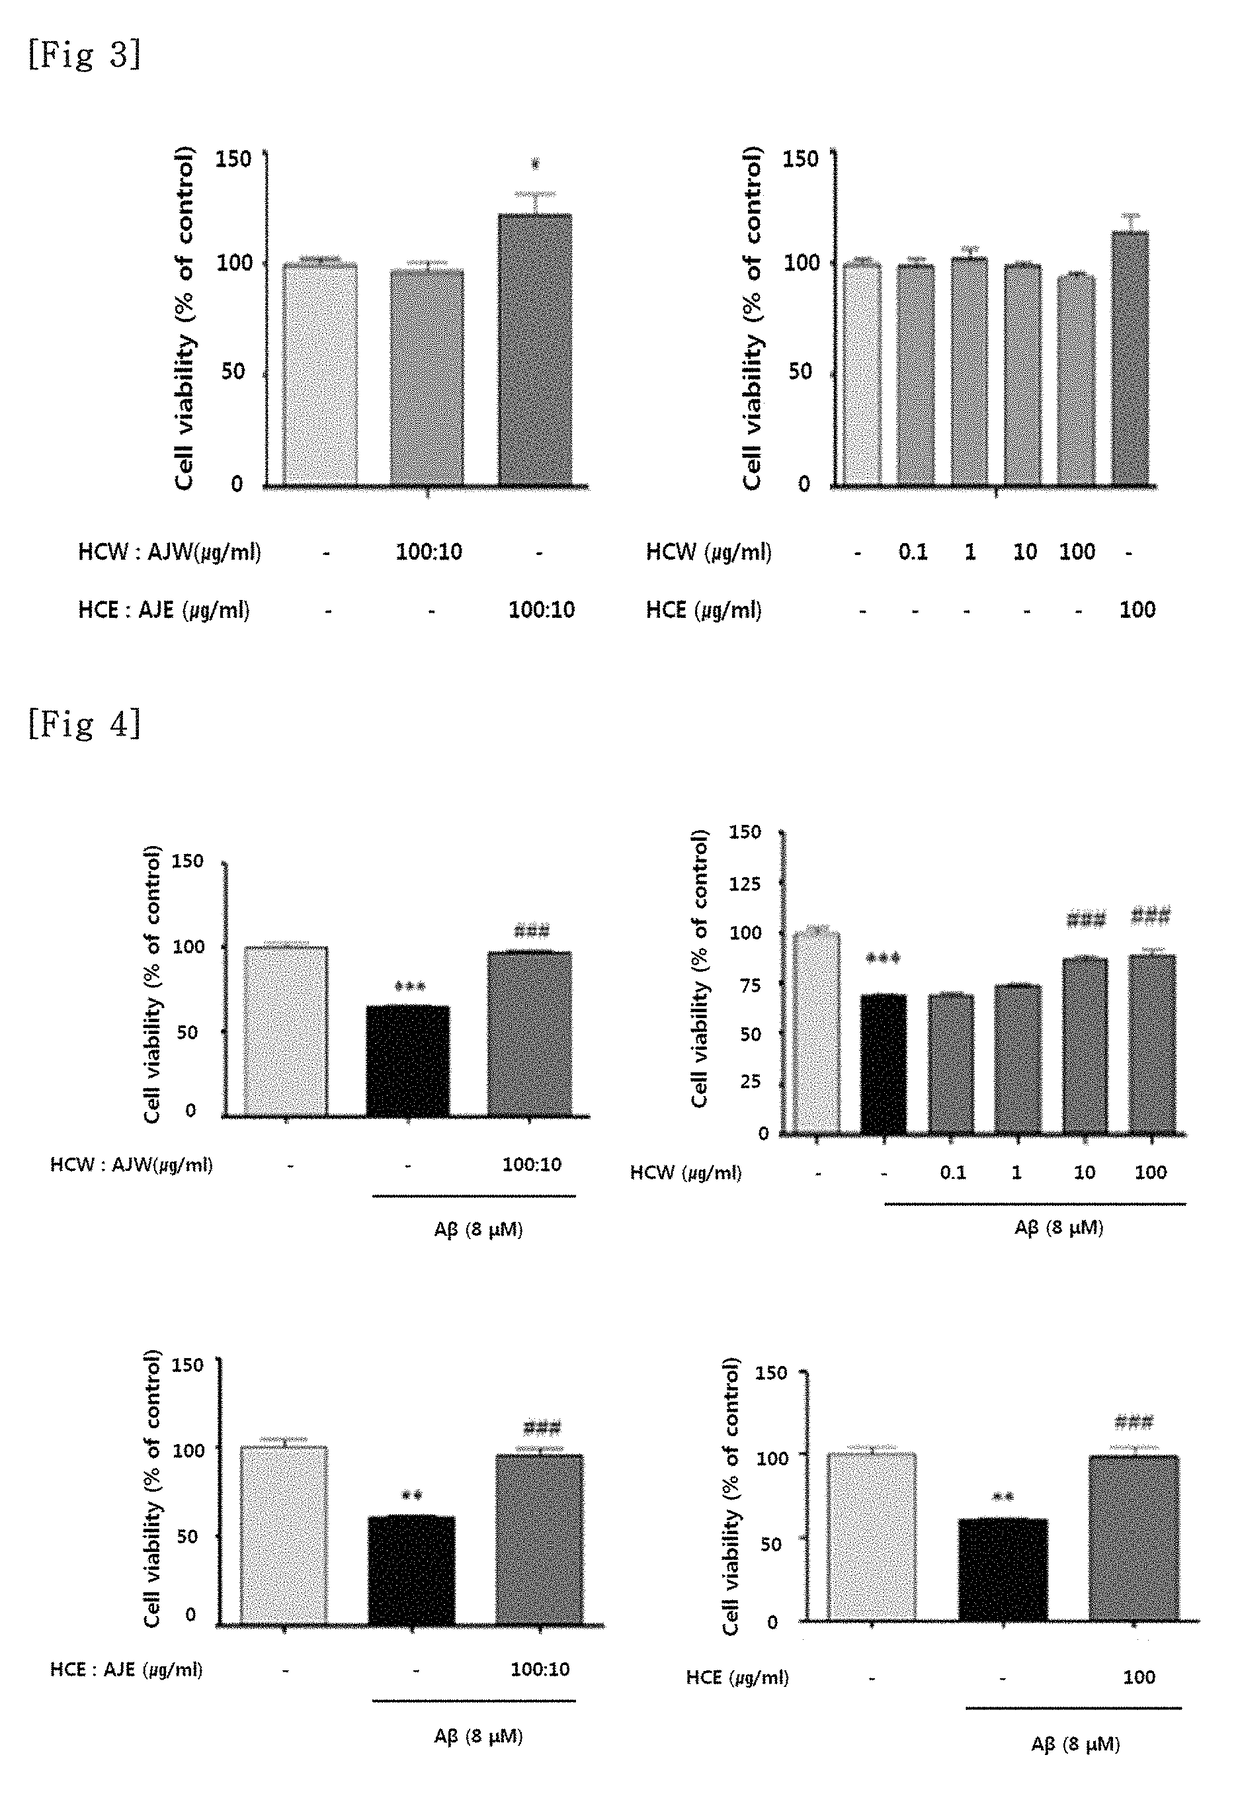 Pharmaceutical composition containing extract of houttuynia cordata as active ingredient for preventing and treating dementia, parkinson's disease, or epilepsy